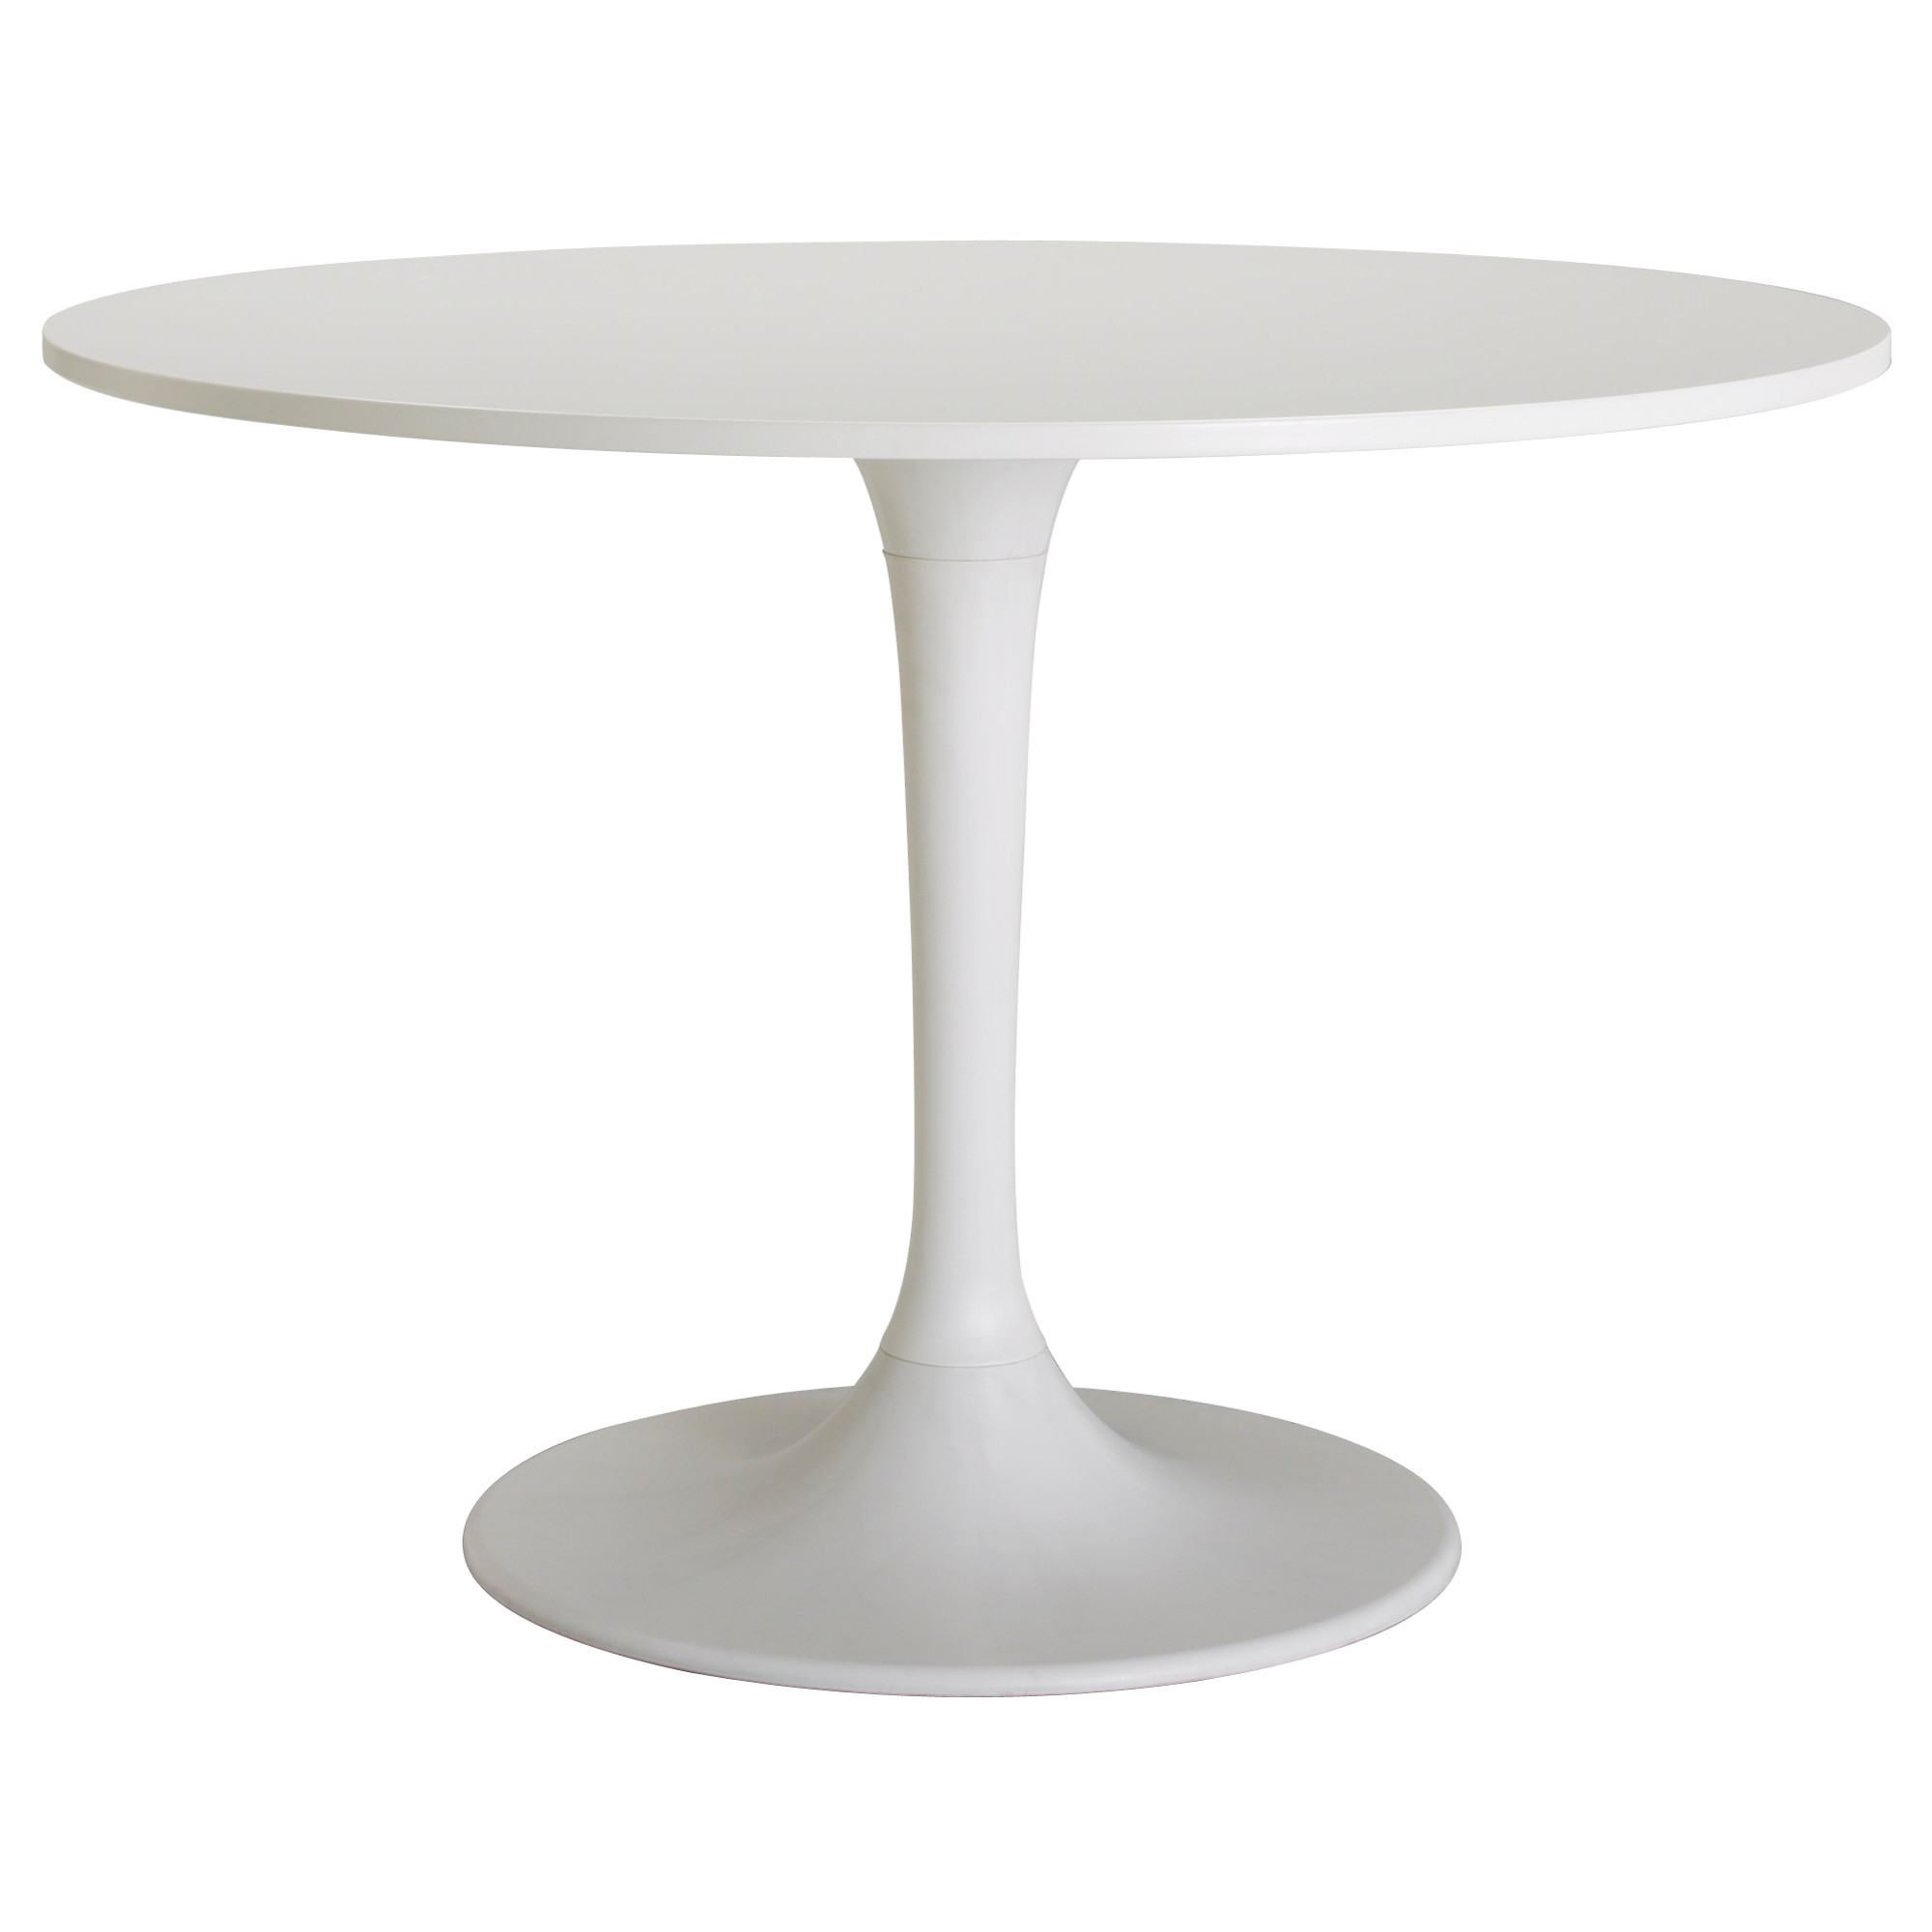 Round White Kitchen Table Set
 Beautiful White Round Kitchen Table and Chairs – HomesFeed